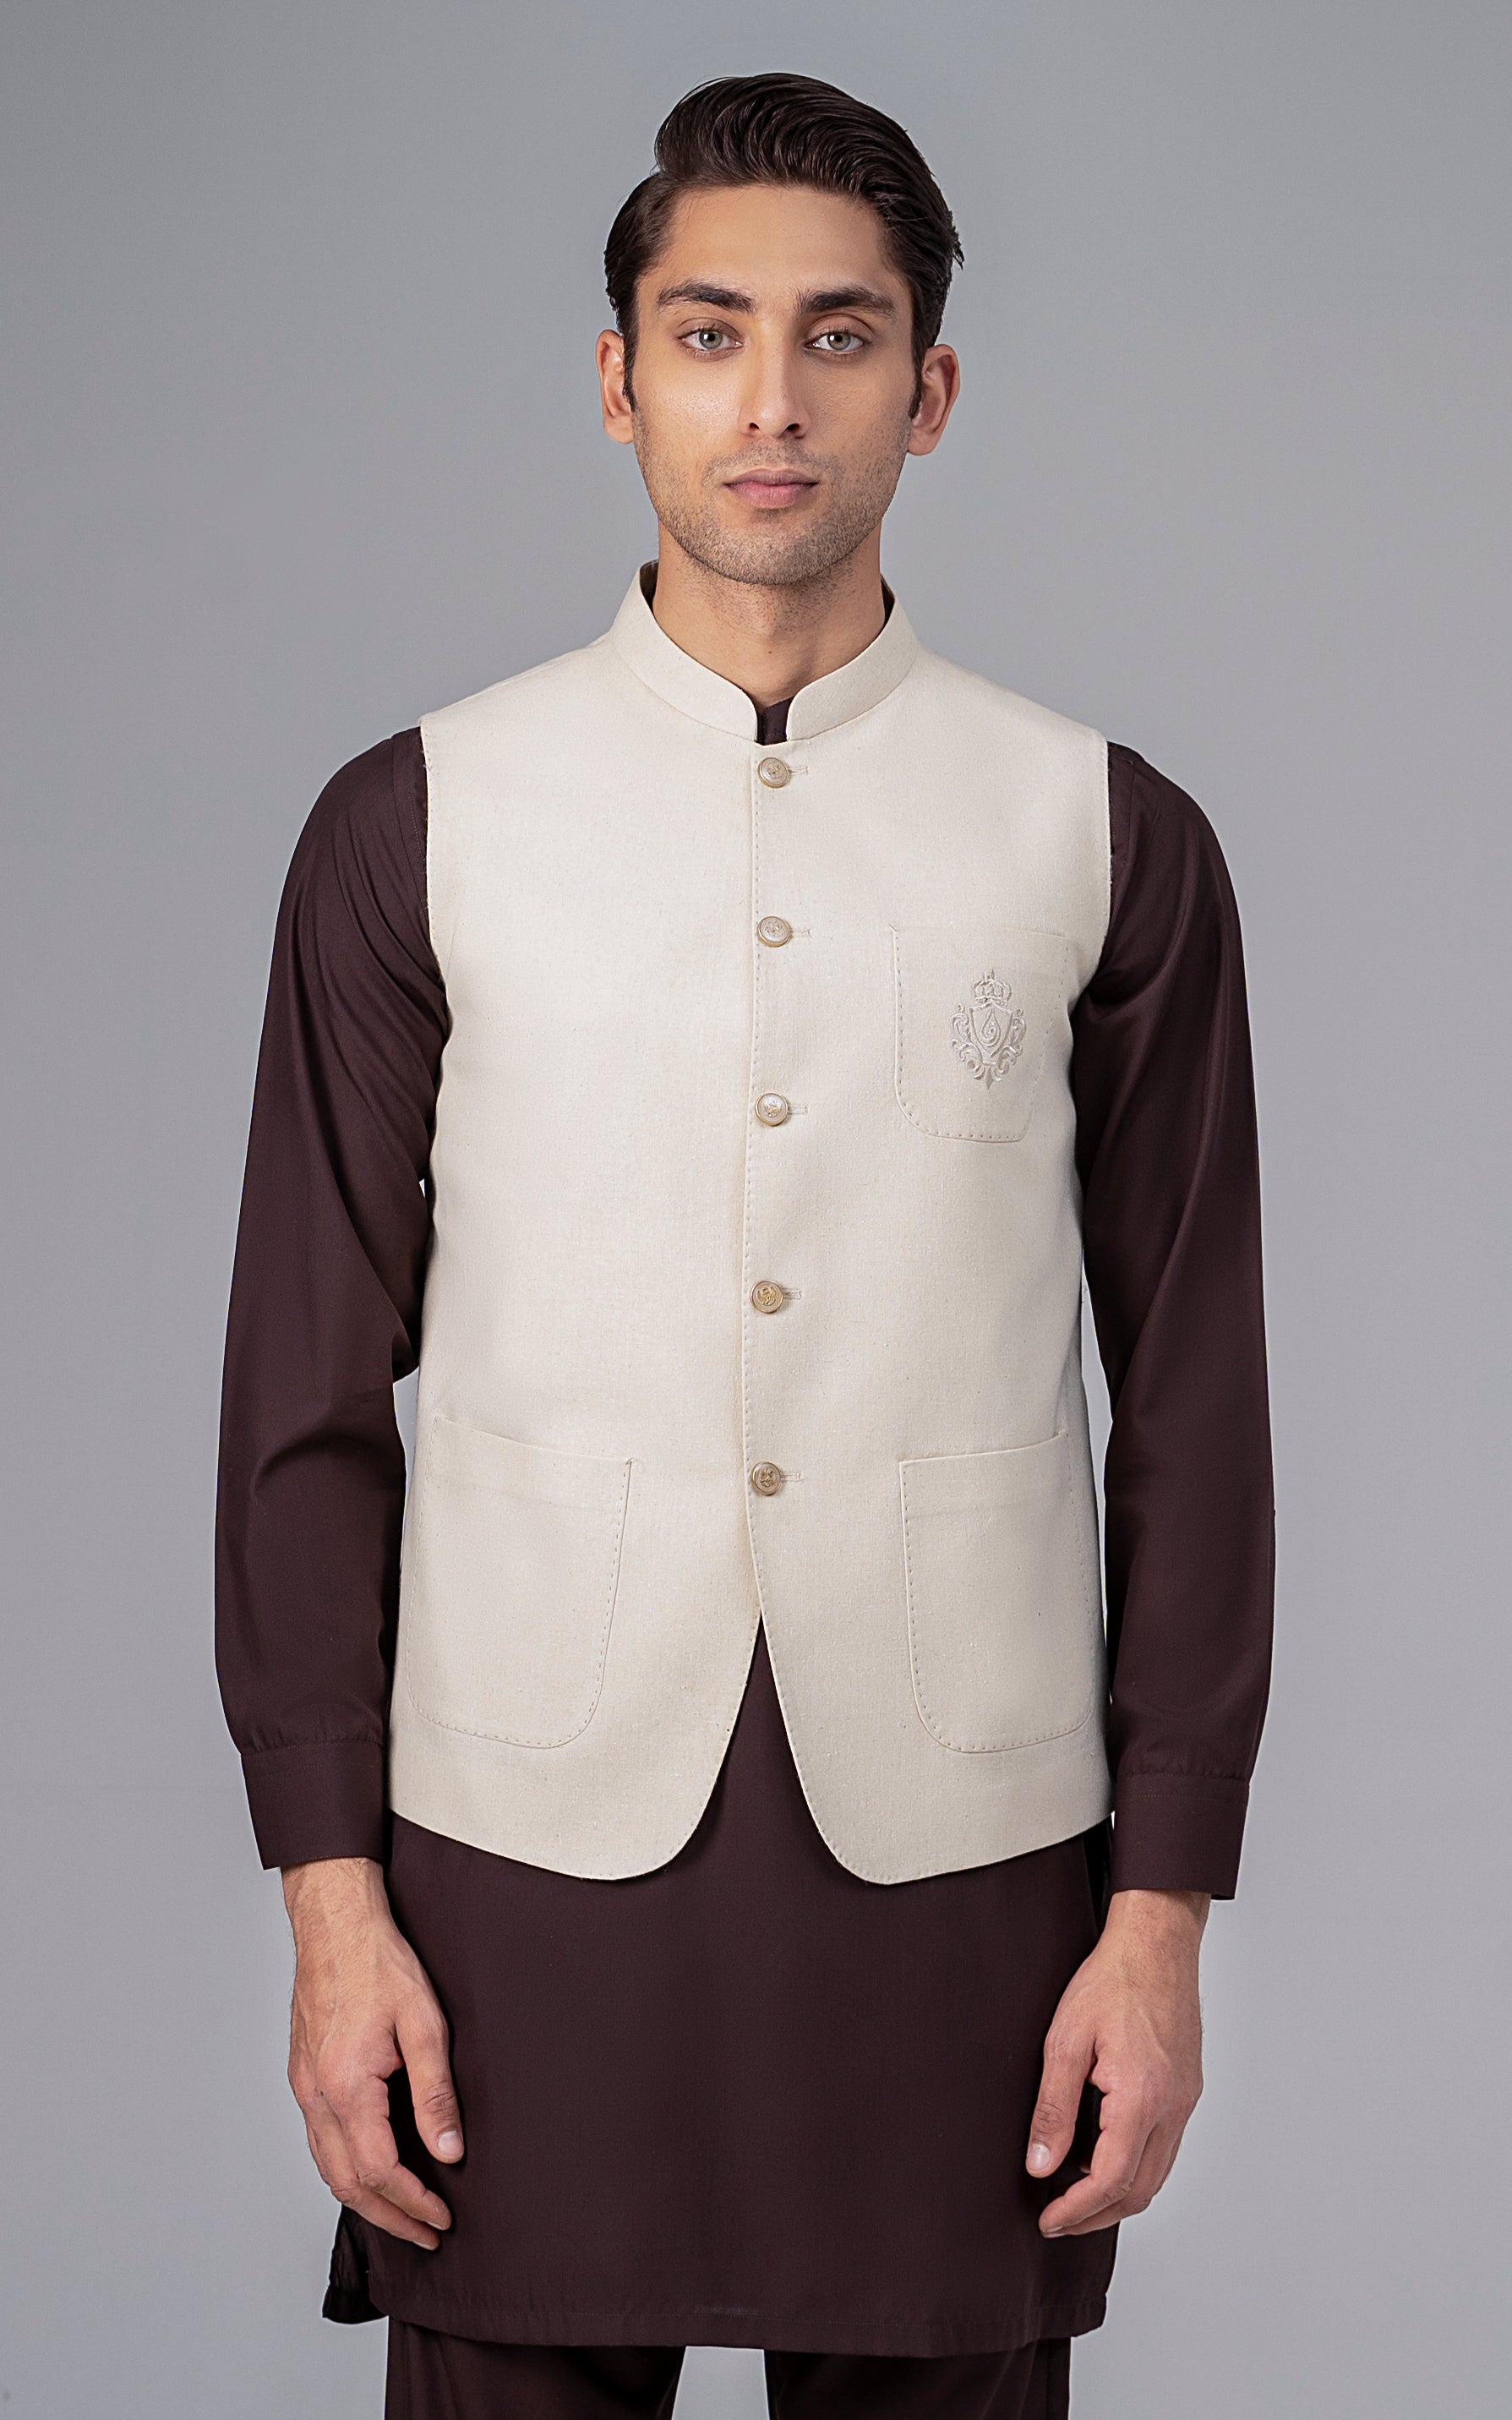 LOGO EMBROIDERED WAISTCOAT- CLASSIC COLLECTIONOFF WHITE